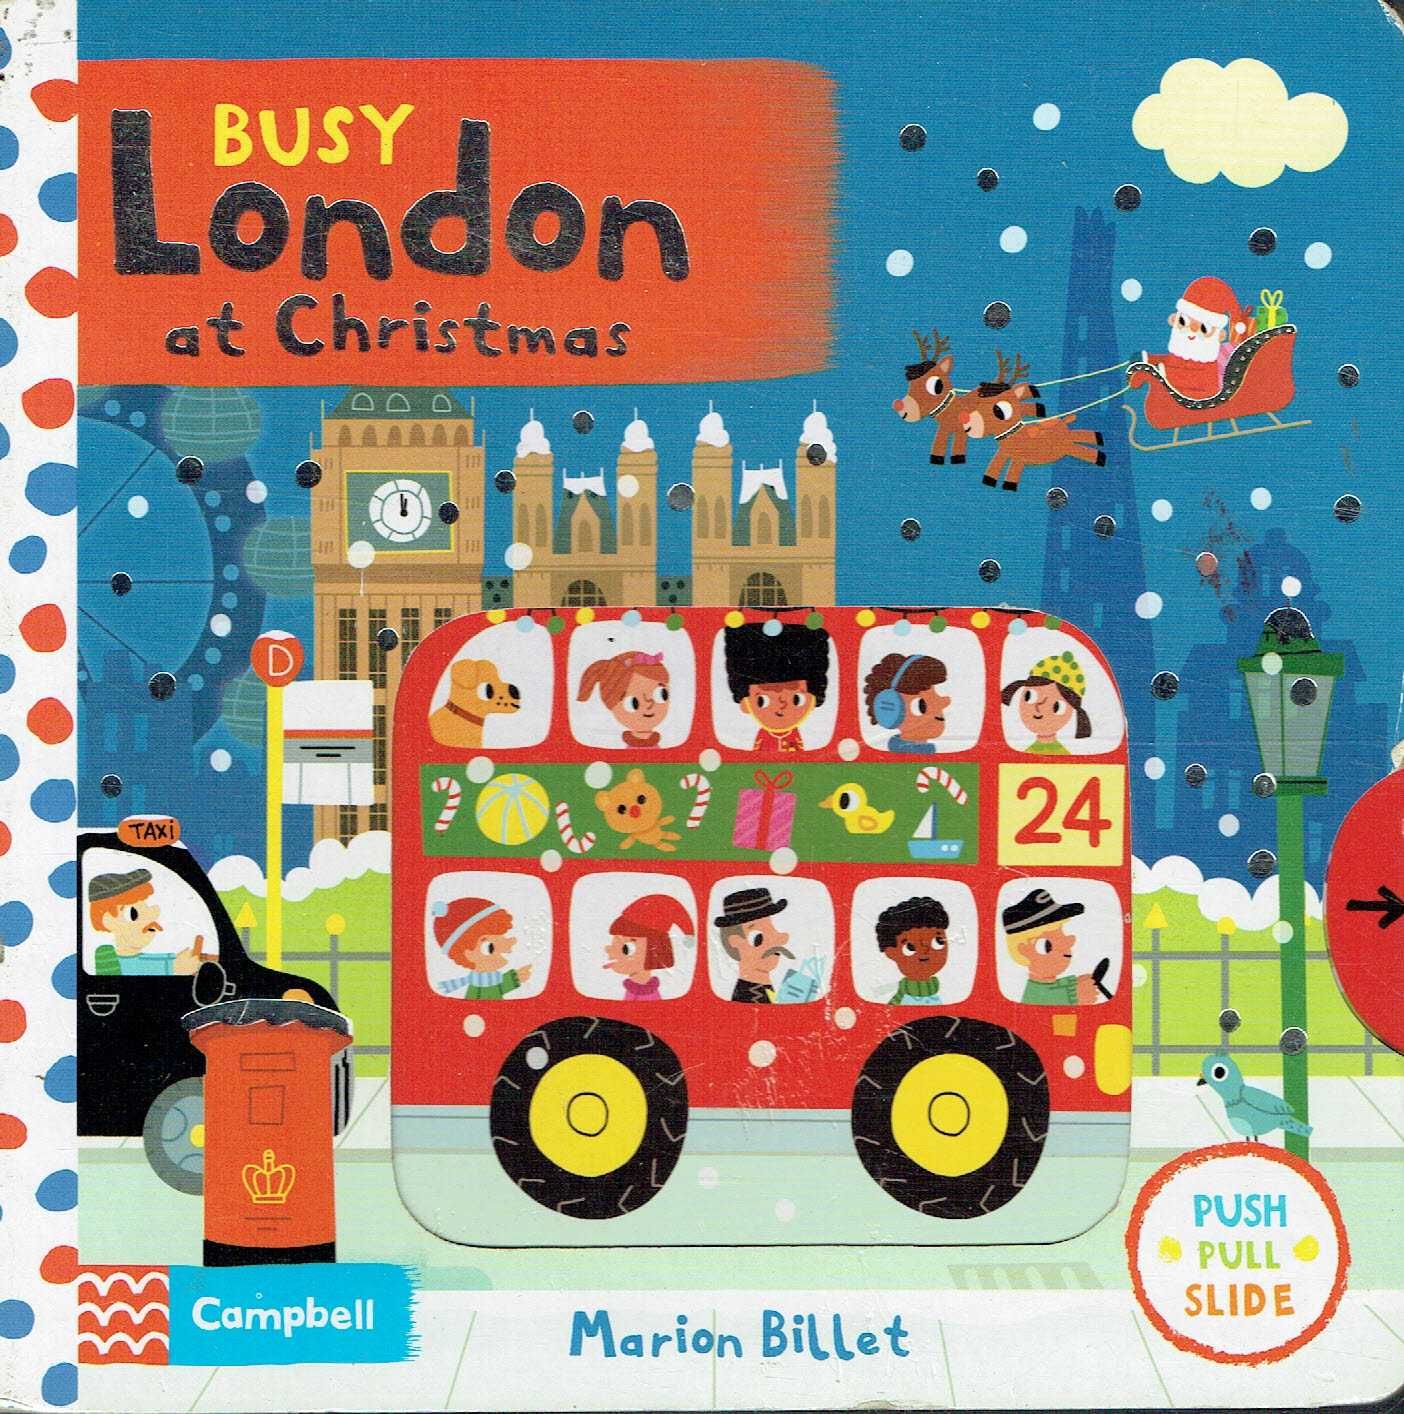 14454

Busy London at Christmas - 3 anos
Marion Billet